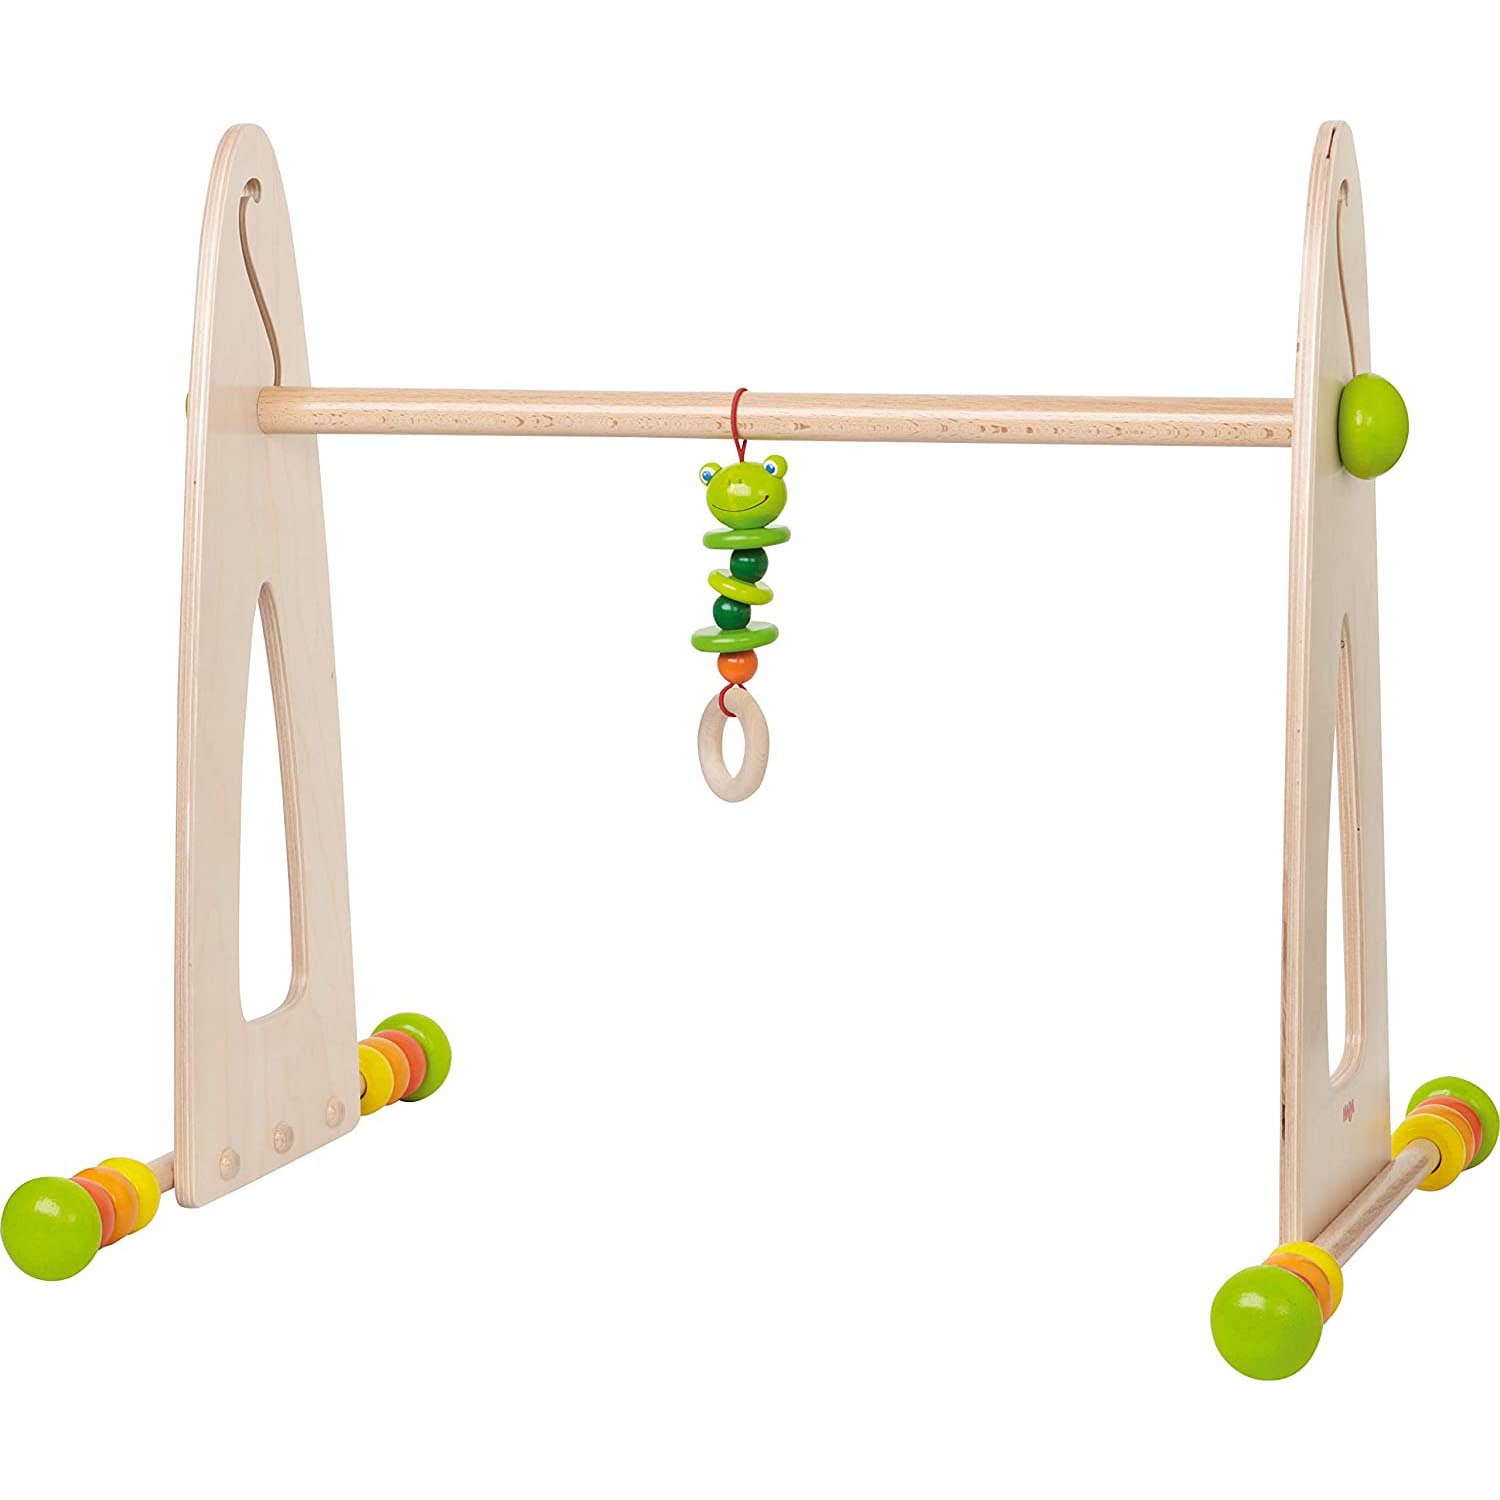 HABA Color Fun Play Gym - Wooden Activity Center with Adjustable Height,  Sliding Discs and Dangling Frog - Walmart.com